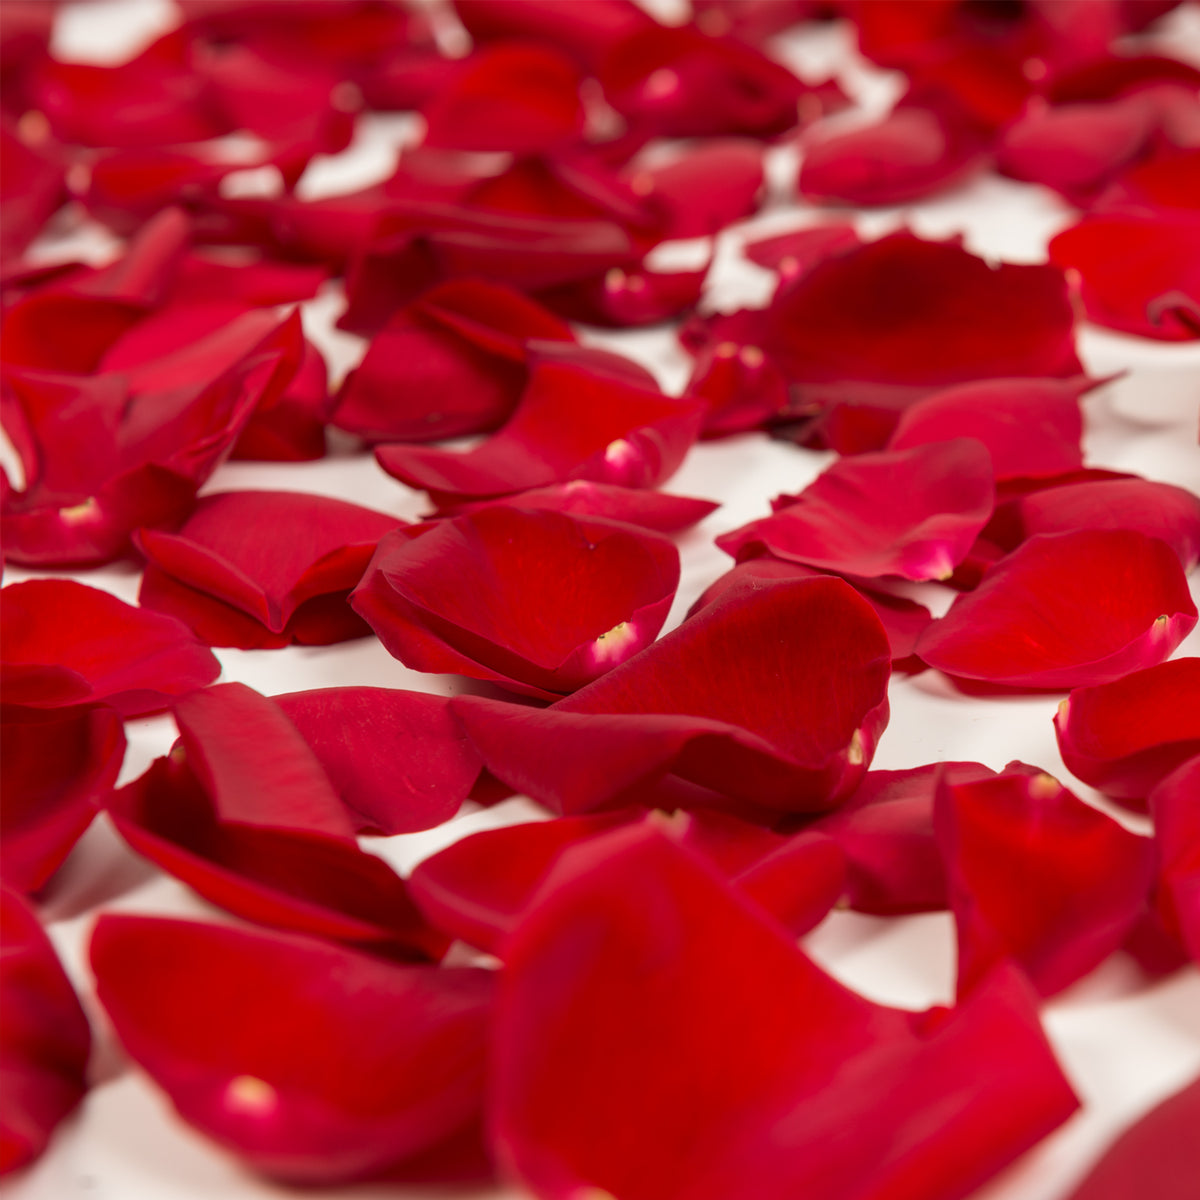 Red Rose Petals Falling Into A Pool Of by Chris Stein